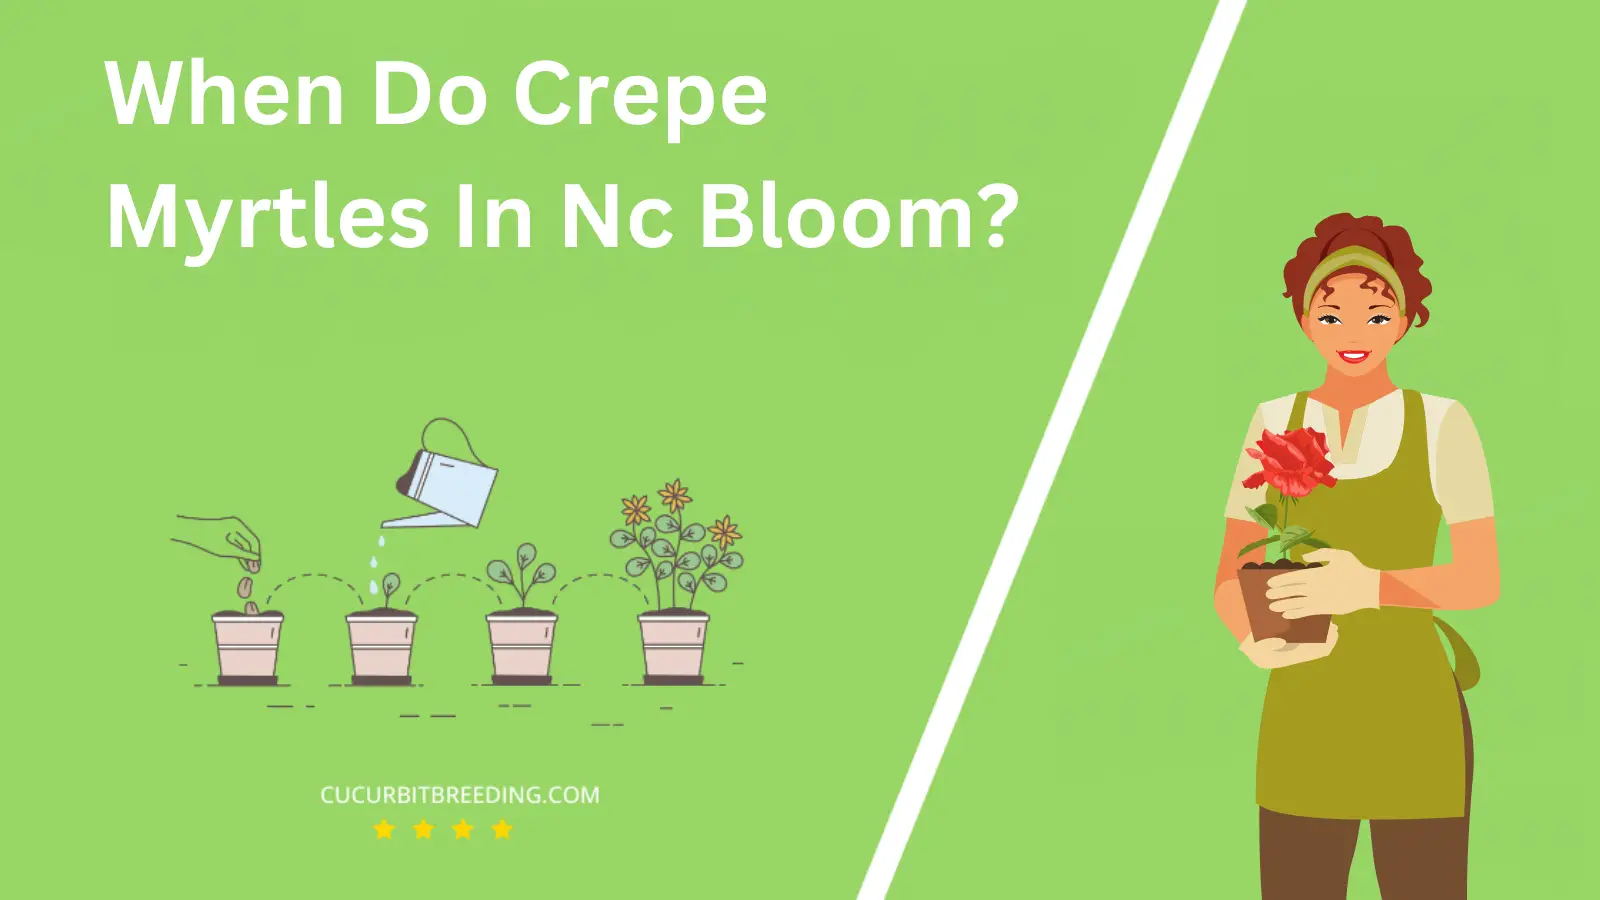 When Do Crepe Myrtles In Nc Bloom?